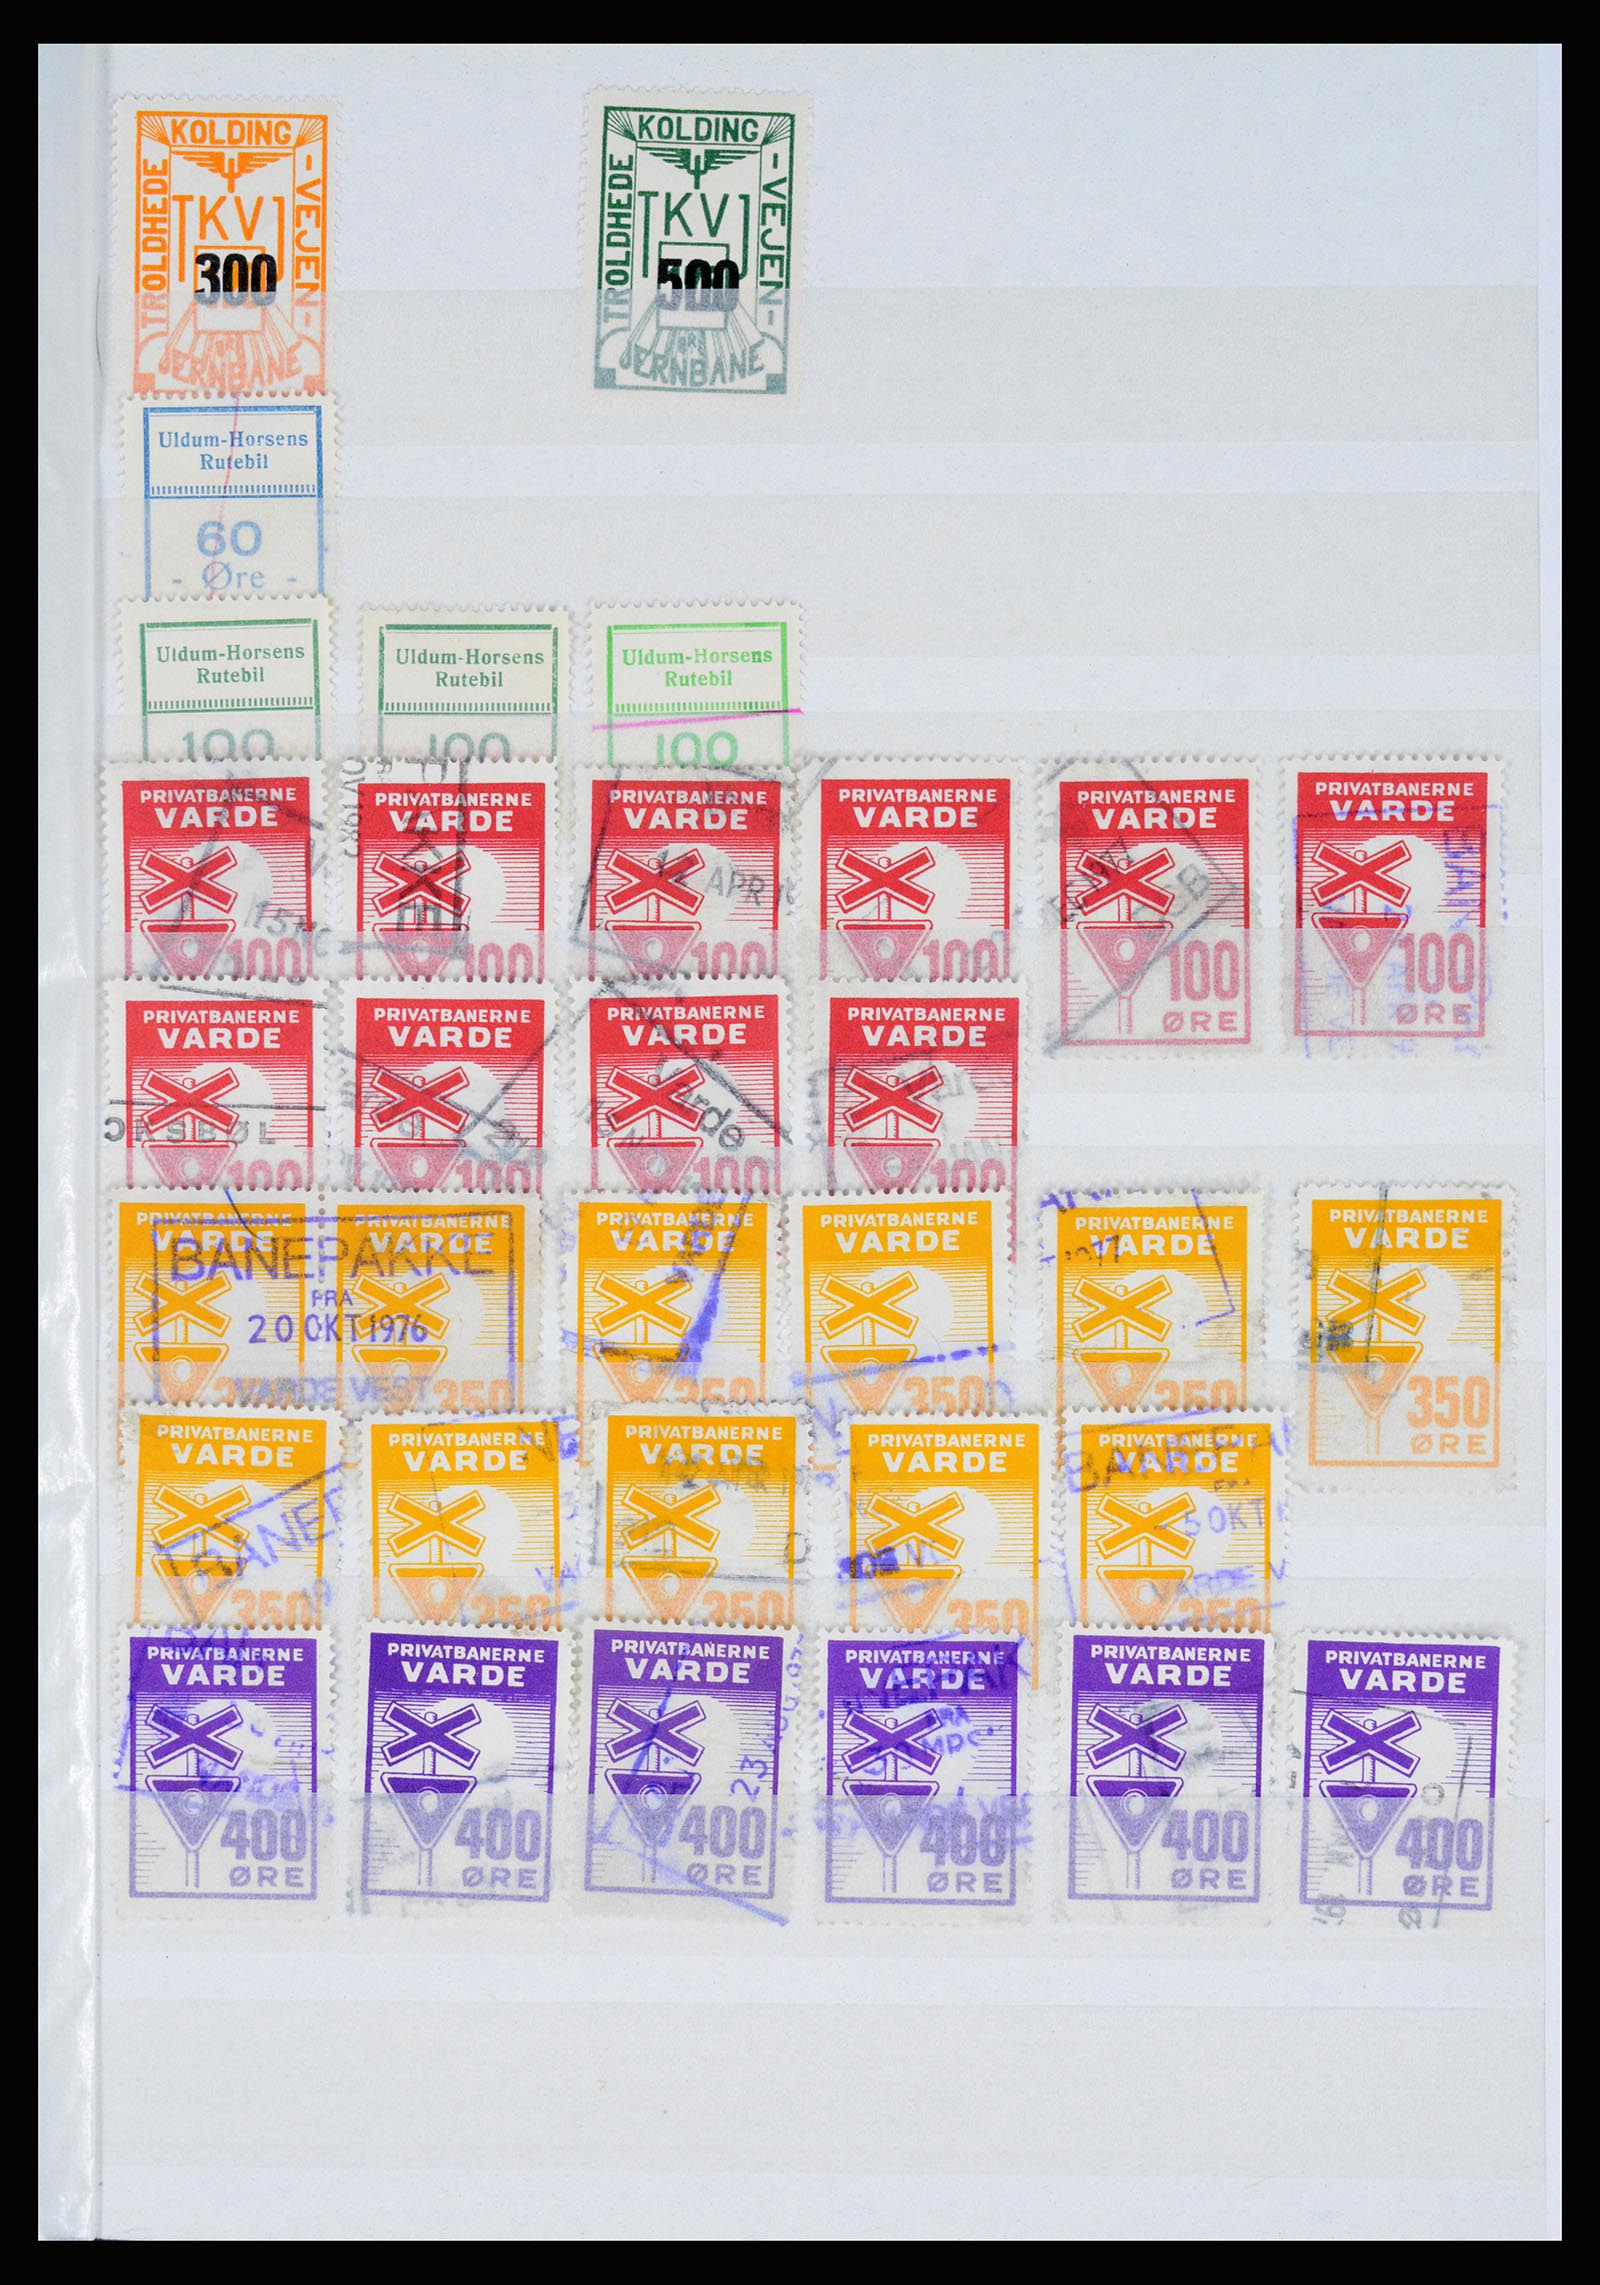 36982 132 - Stamp collection 36982 Denmark railroad stamps.